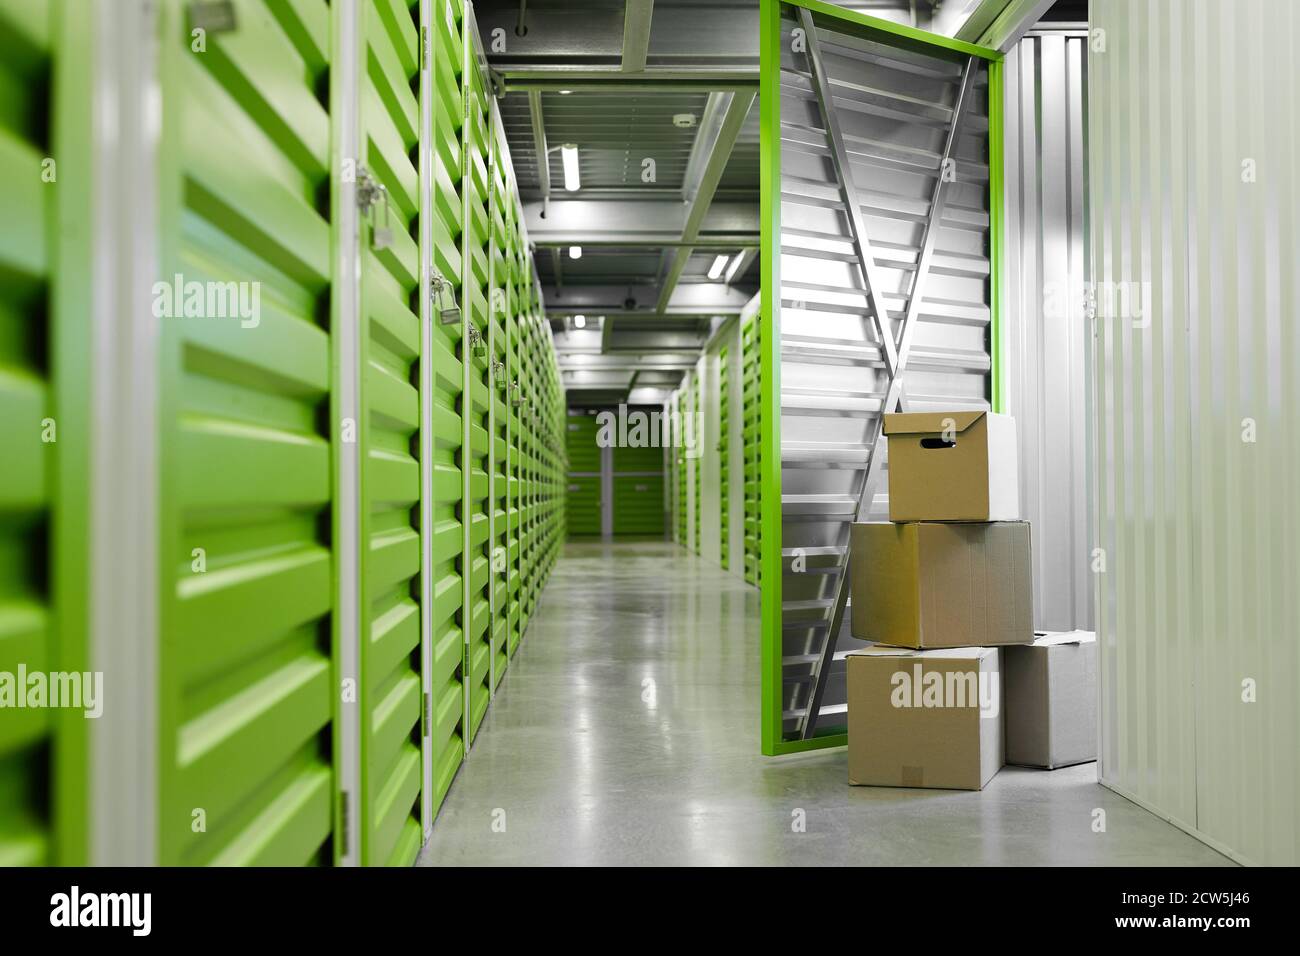 Background image of green self storage facility with opened unit door and cardboard boxes, copy space Stock Photo